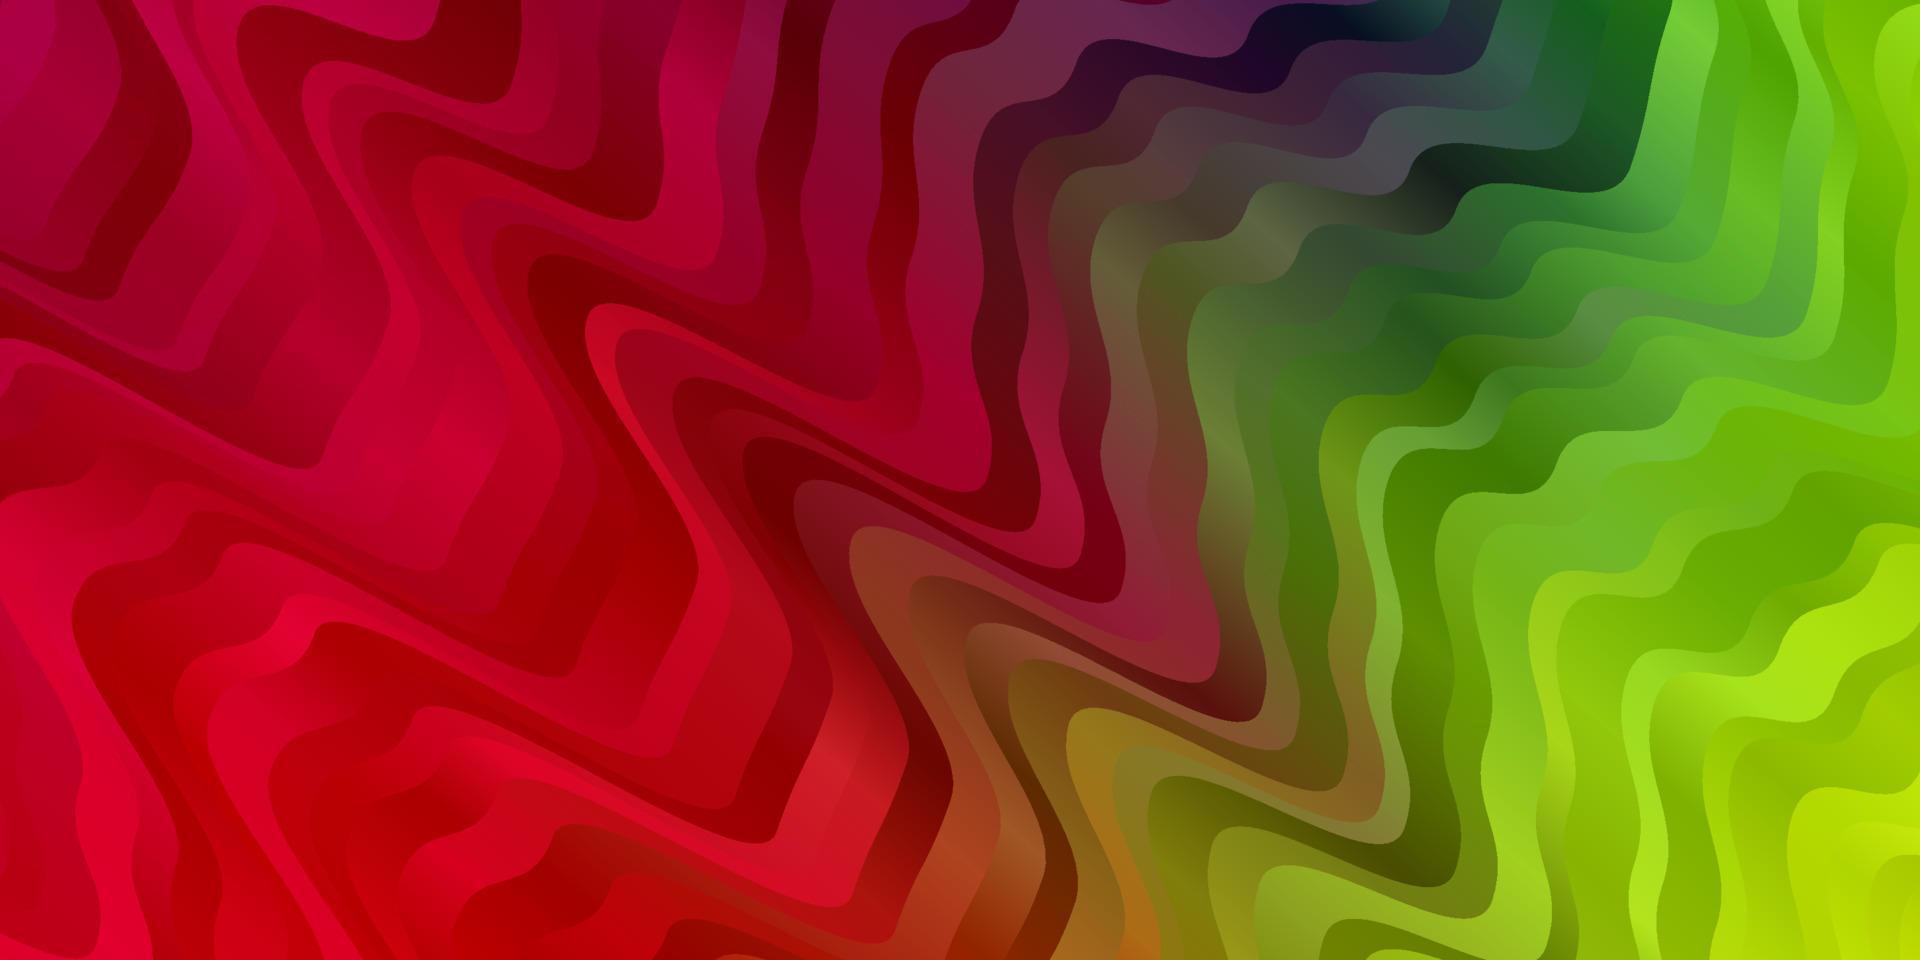 Light Multicolor vector template with wry lines.